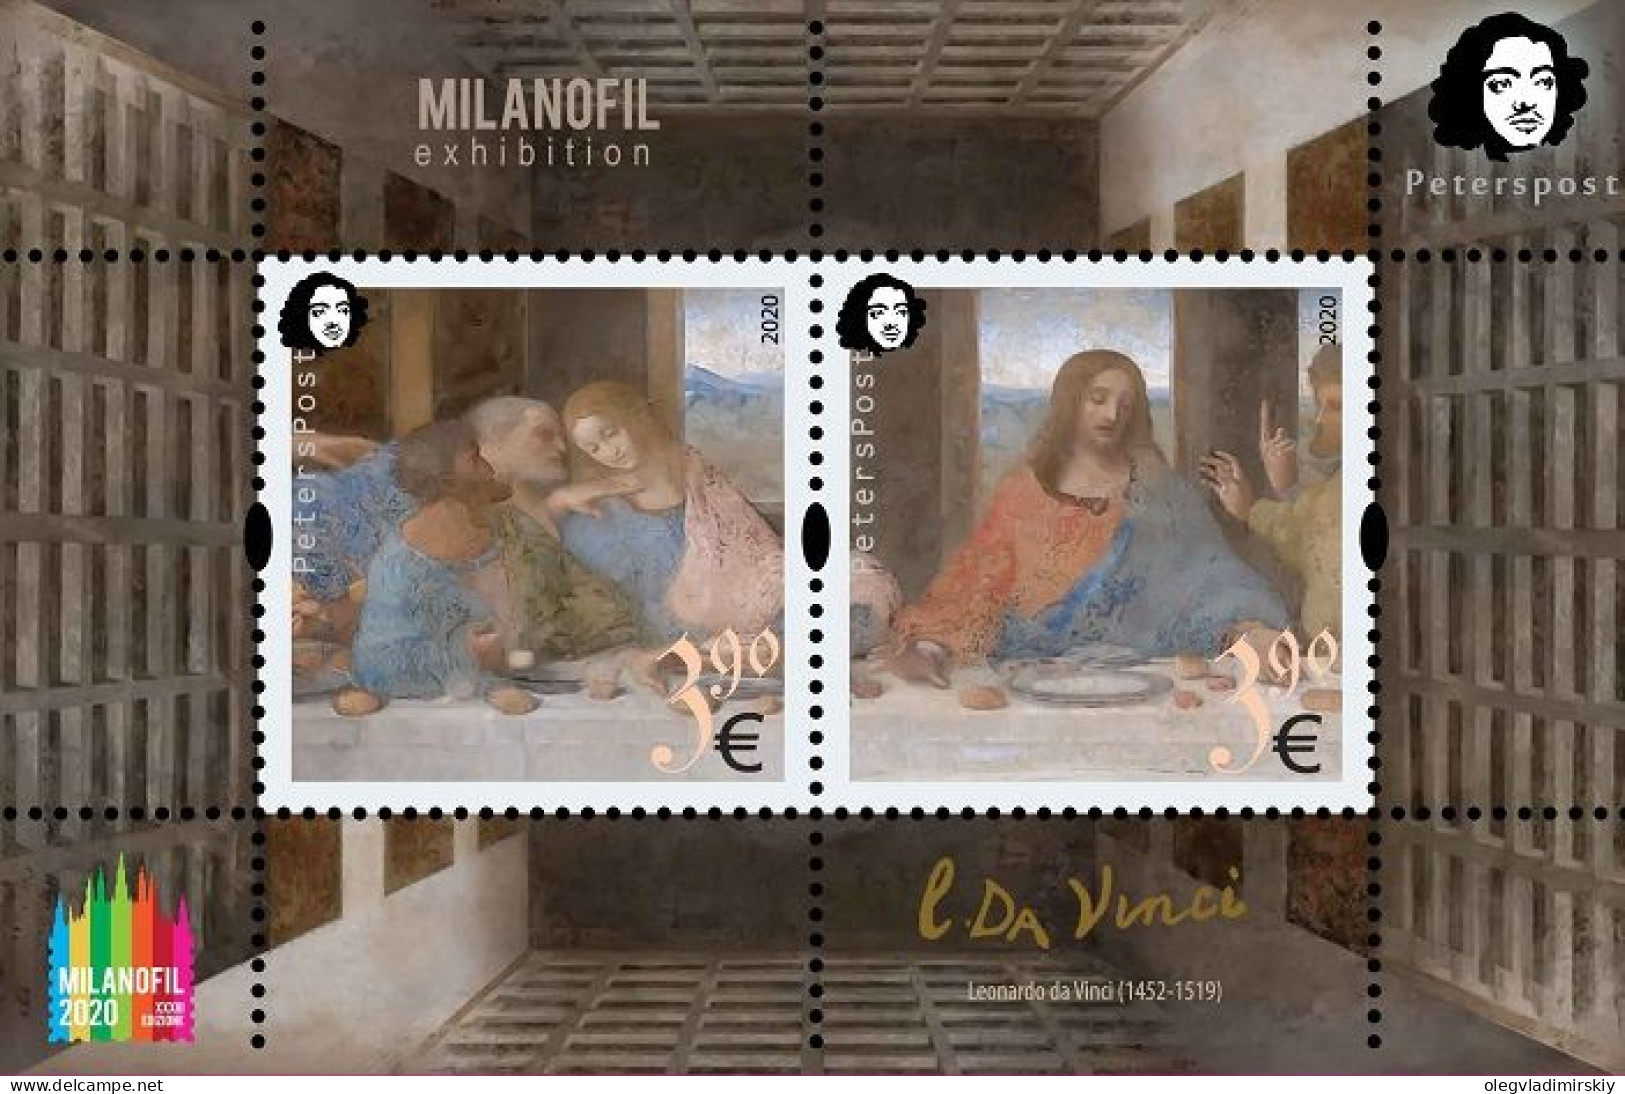 Finland 2020 Leonardo Da Vinci 500 Years From The Date Of Death "The Lord's Supper" MILANOFIL-2020 Peterspost Block MNH - Blocks & Sheetlets